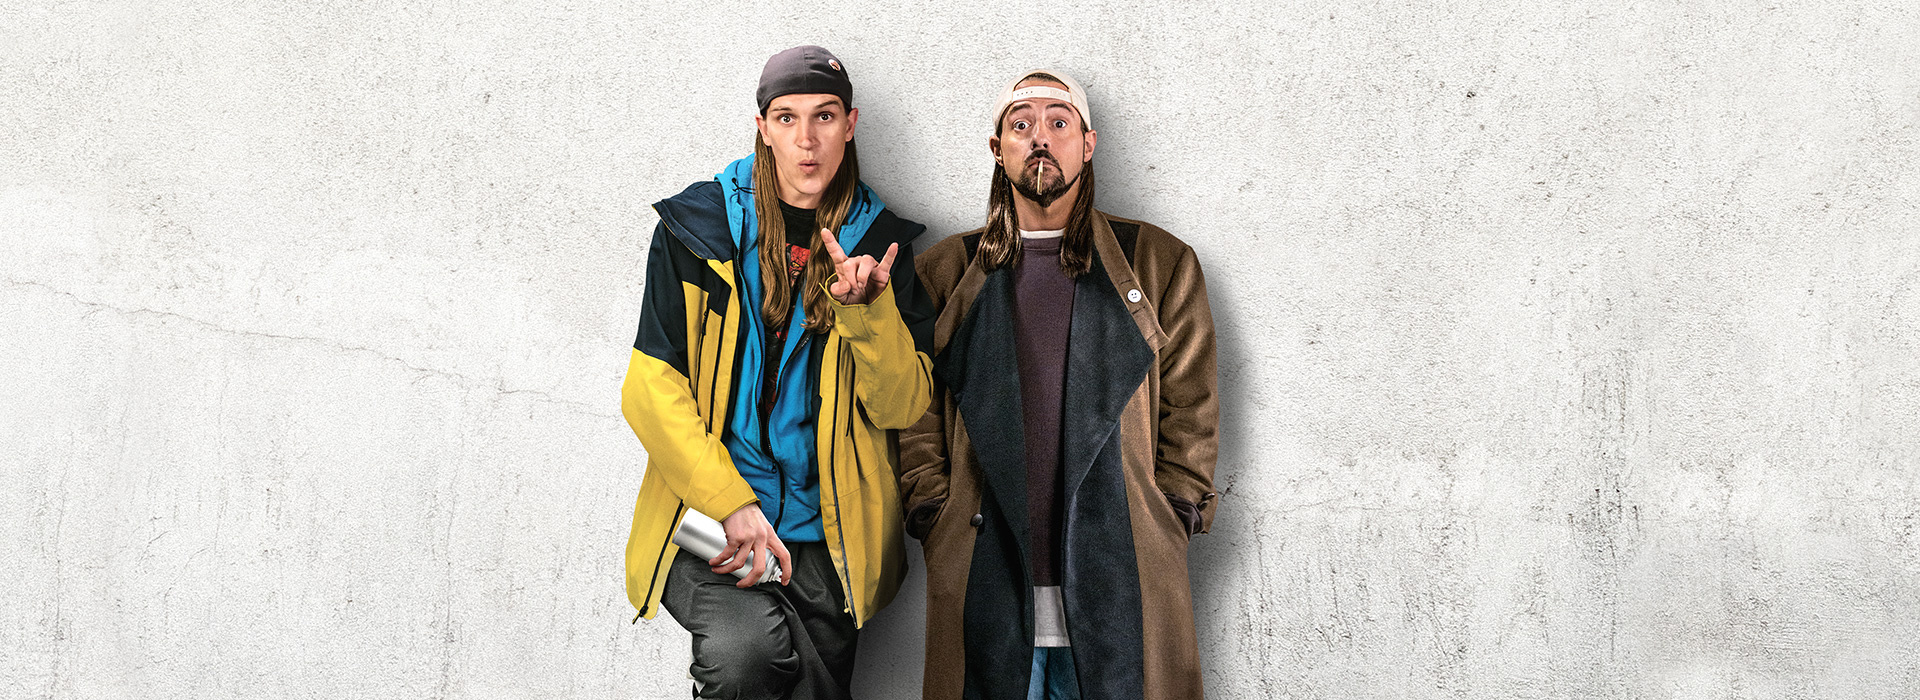 Movie poster Jay and Silent Bob Reboot